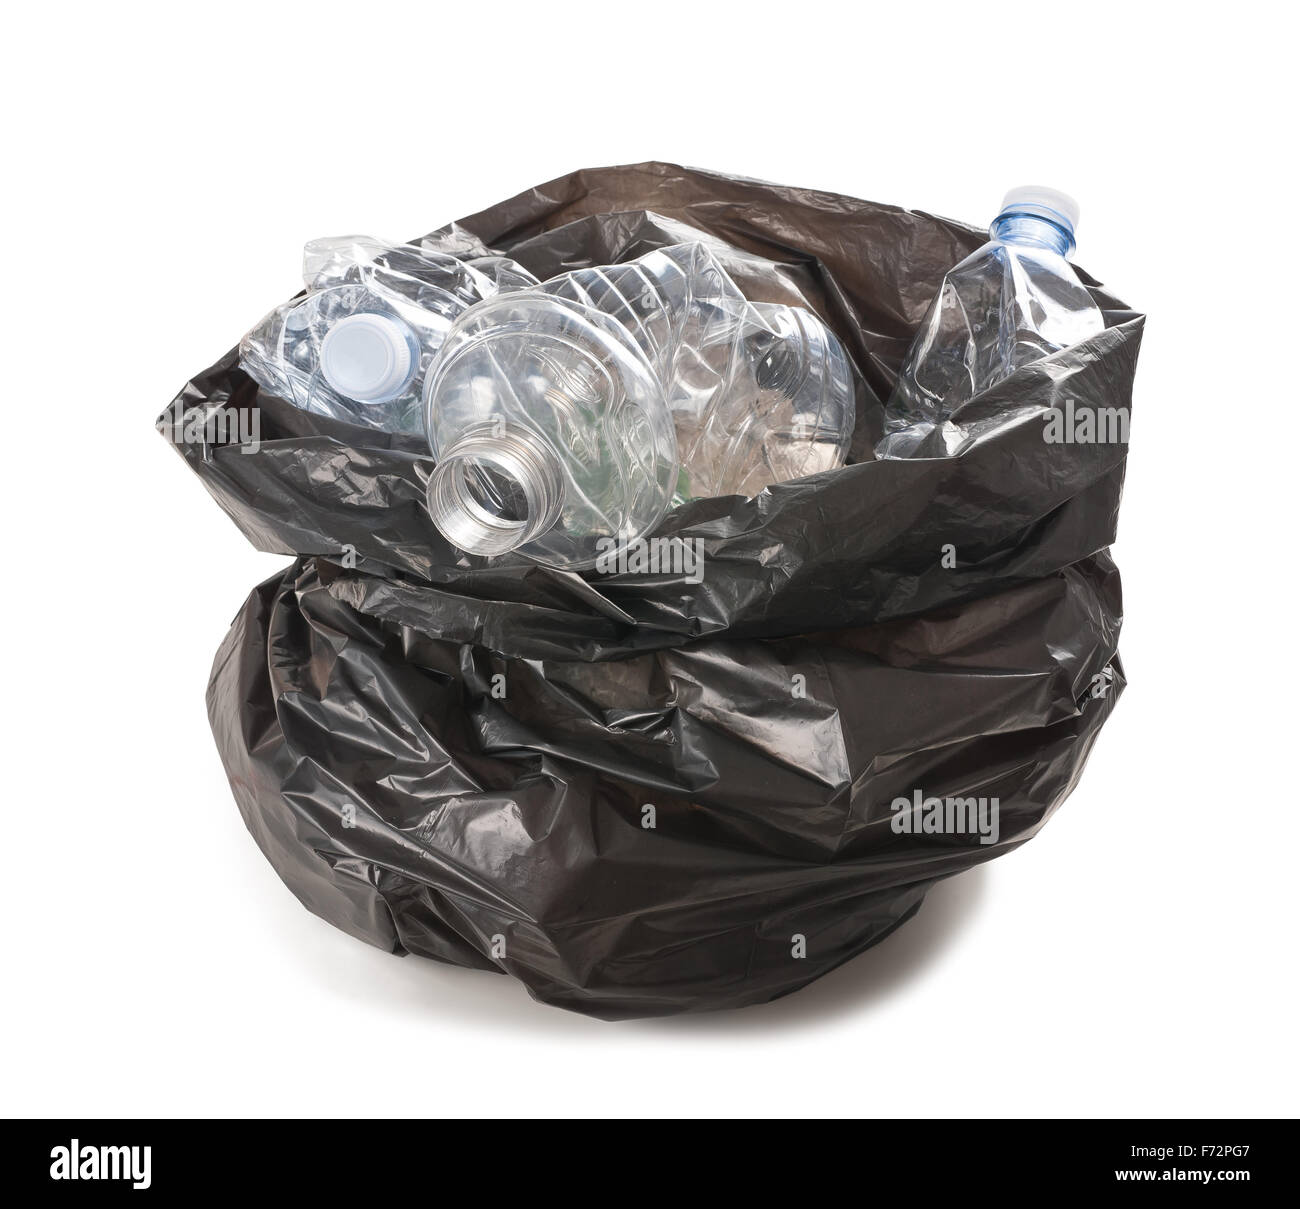 garbage bag with plastic bottles Stock Photo